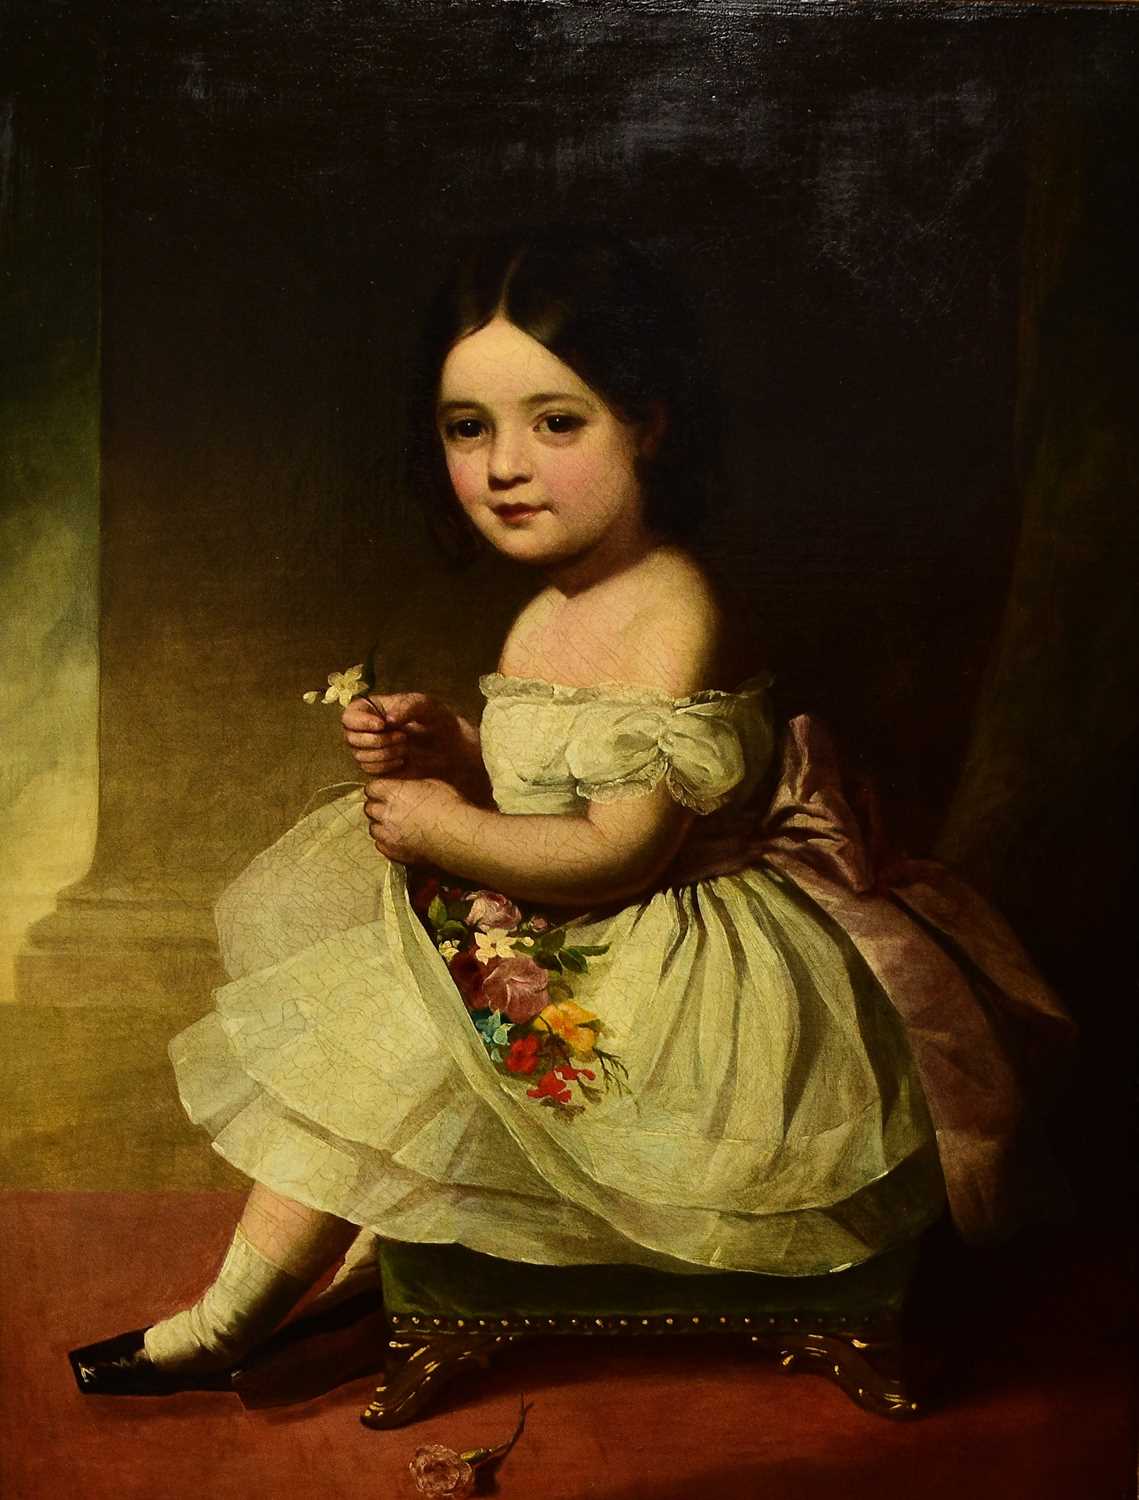 English School (c.1830) Portrait of a Young Girl Holding Flowers